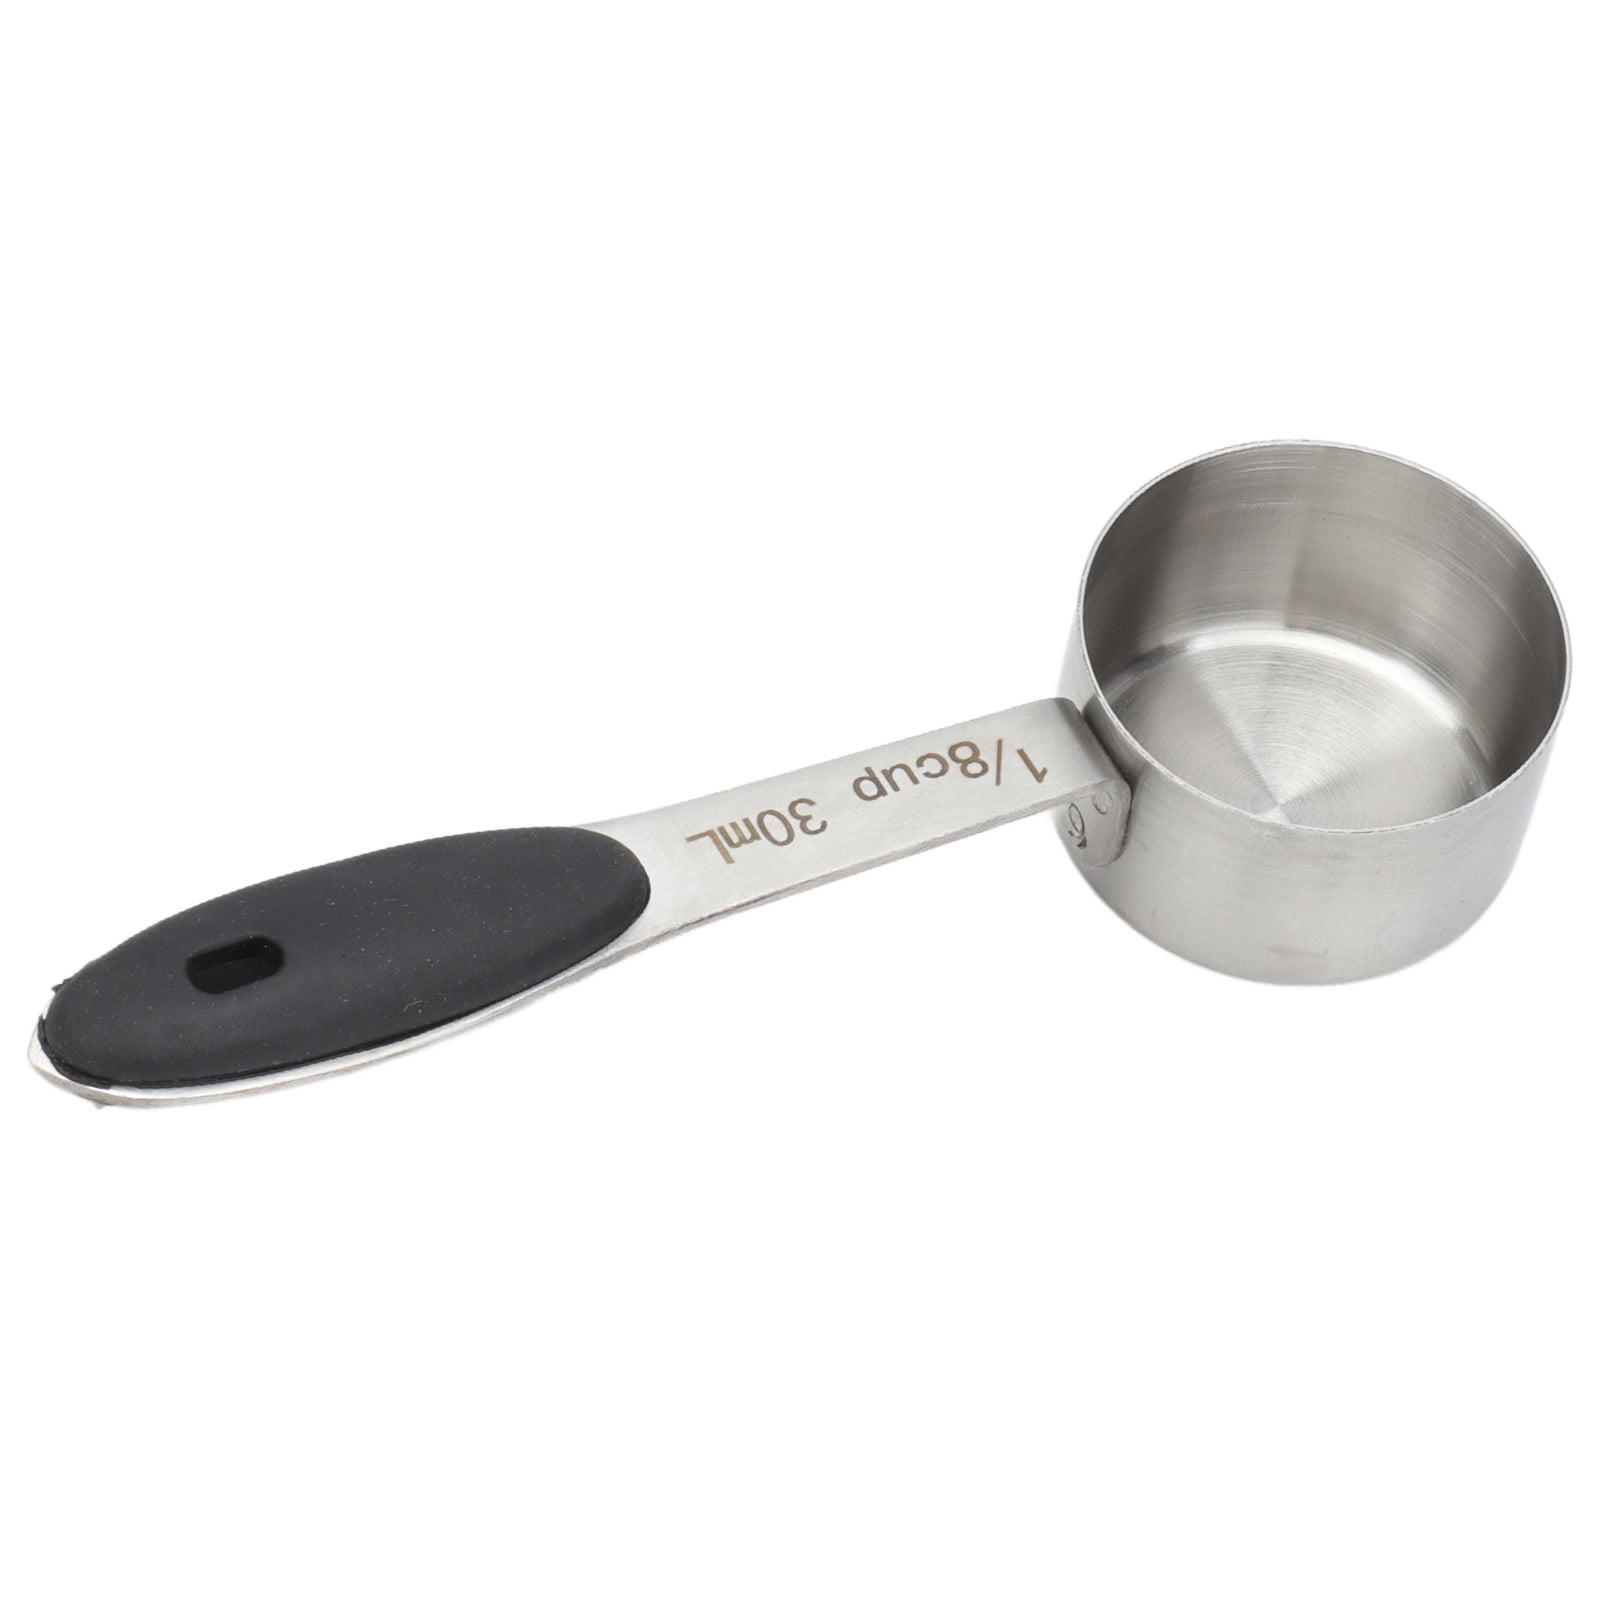 ALAZCO 3 PC Coffee Measuring Scoop 1/8 Cup Stainless Steel